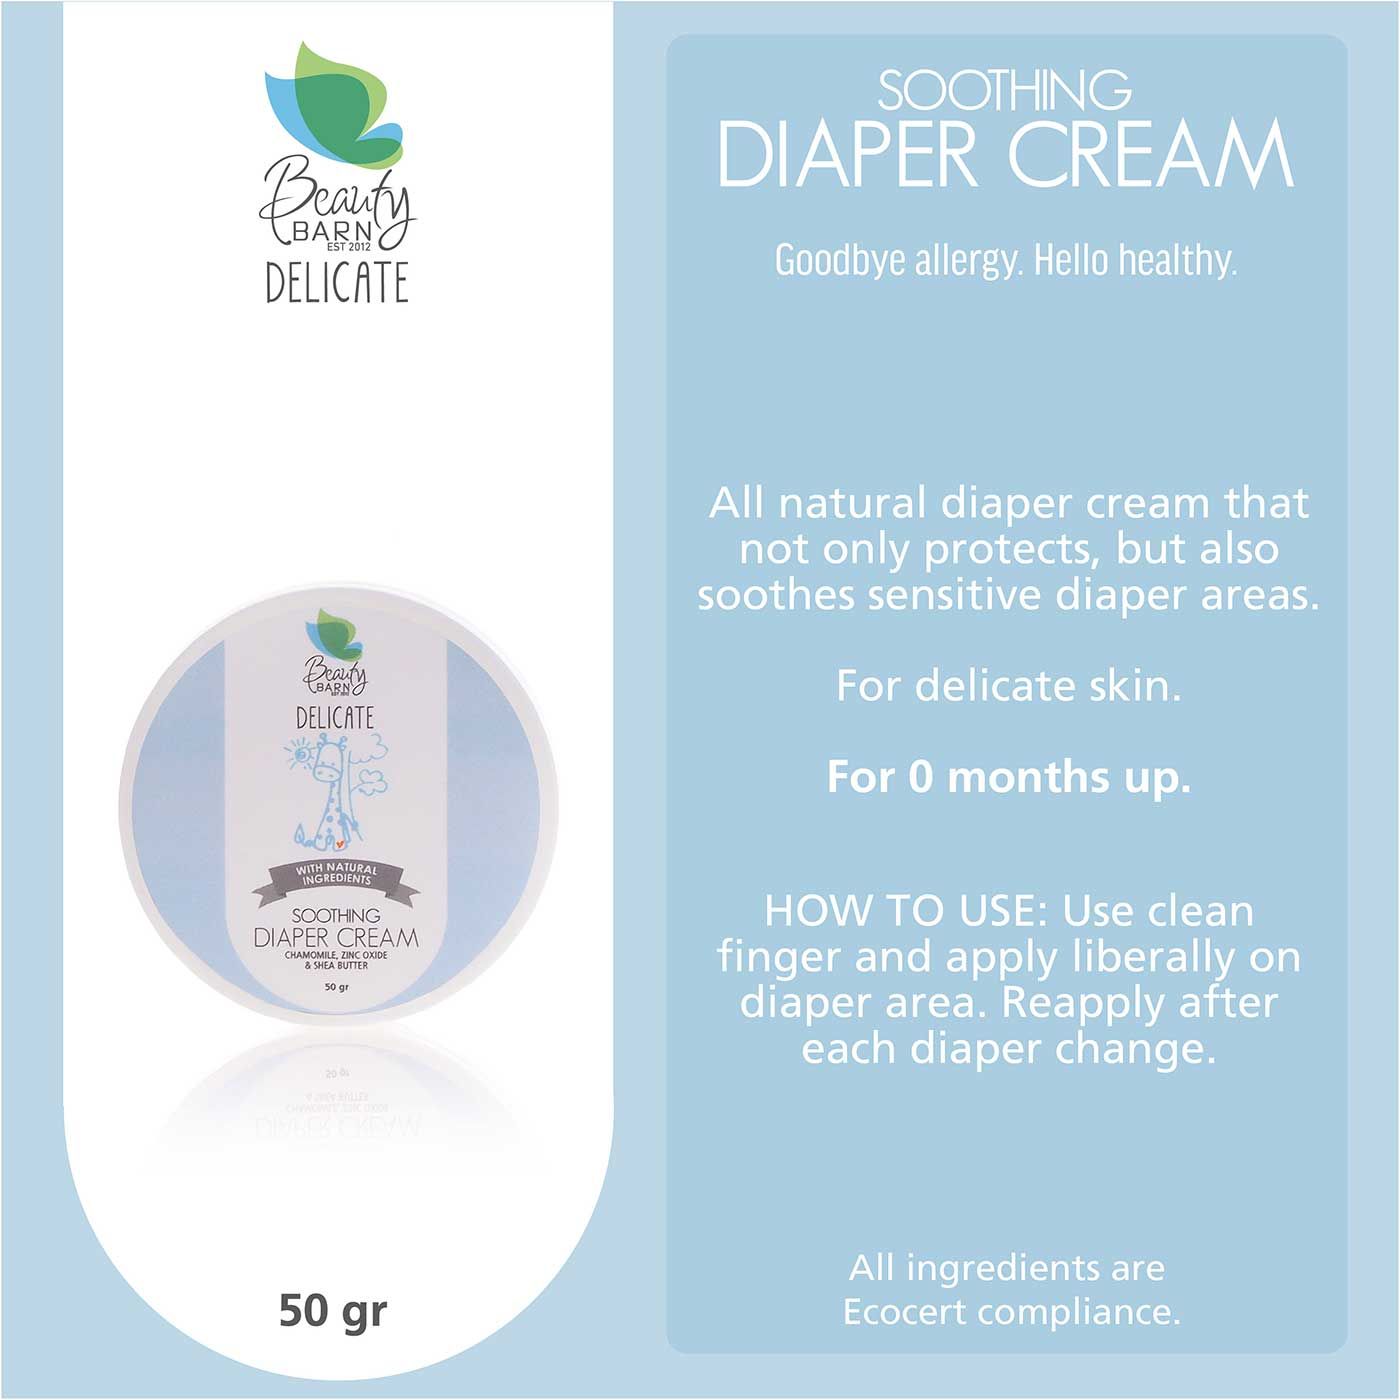 Beauty Barn Delicate - Soothing Diaper Cream 50g - 2